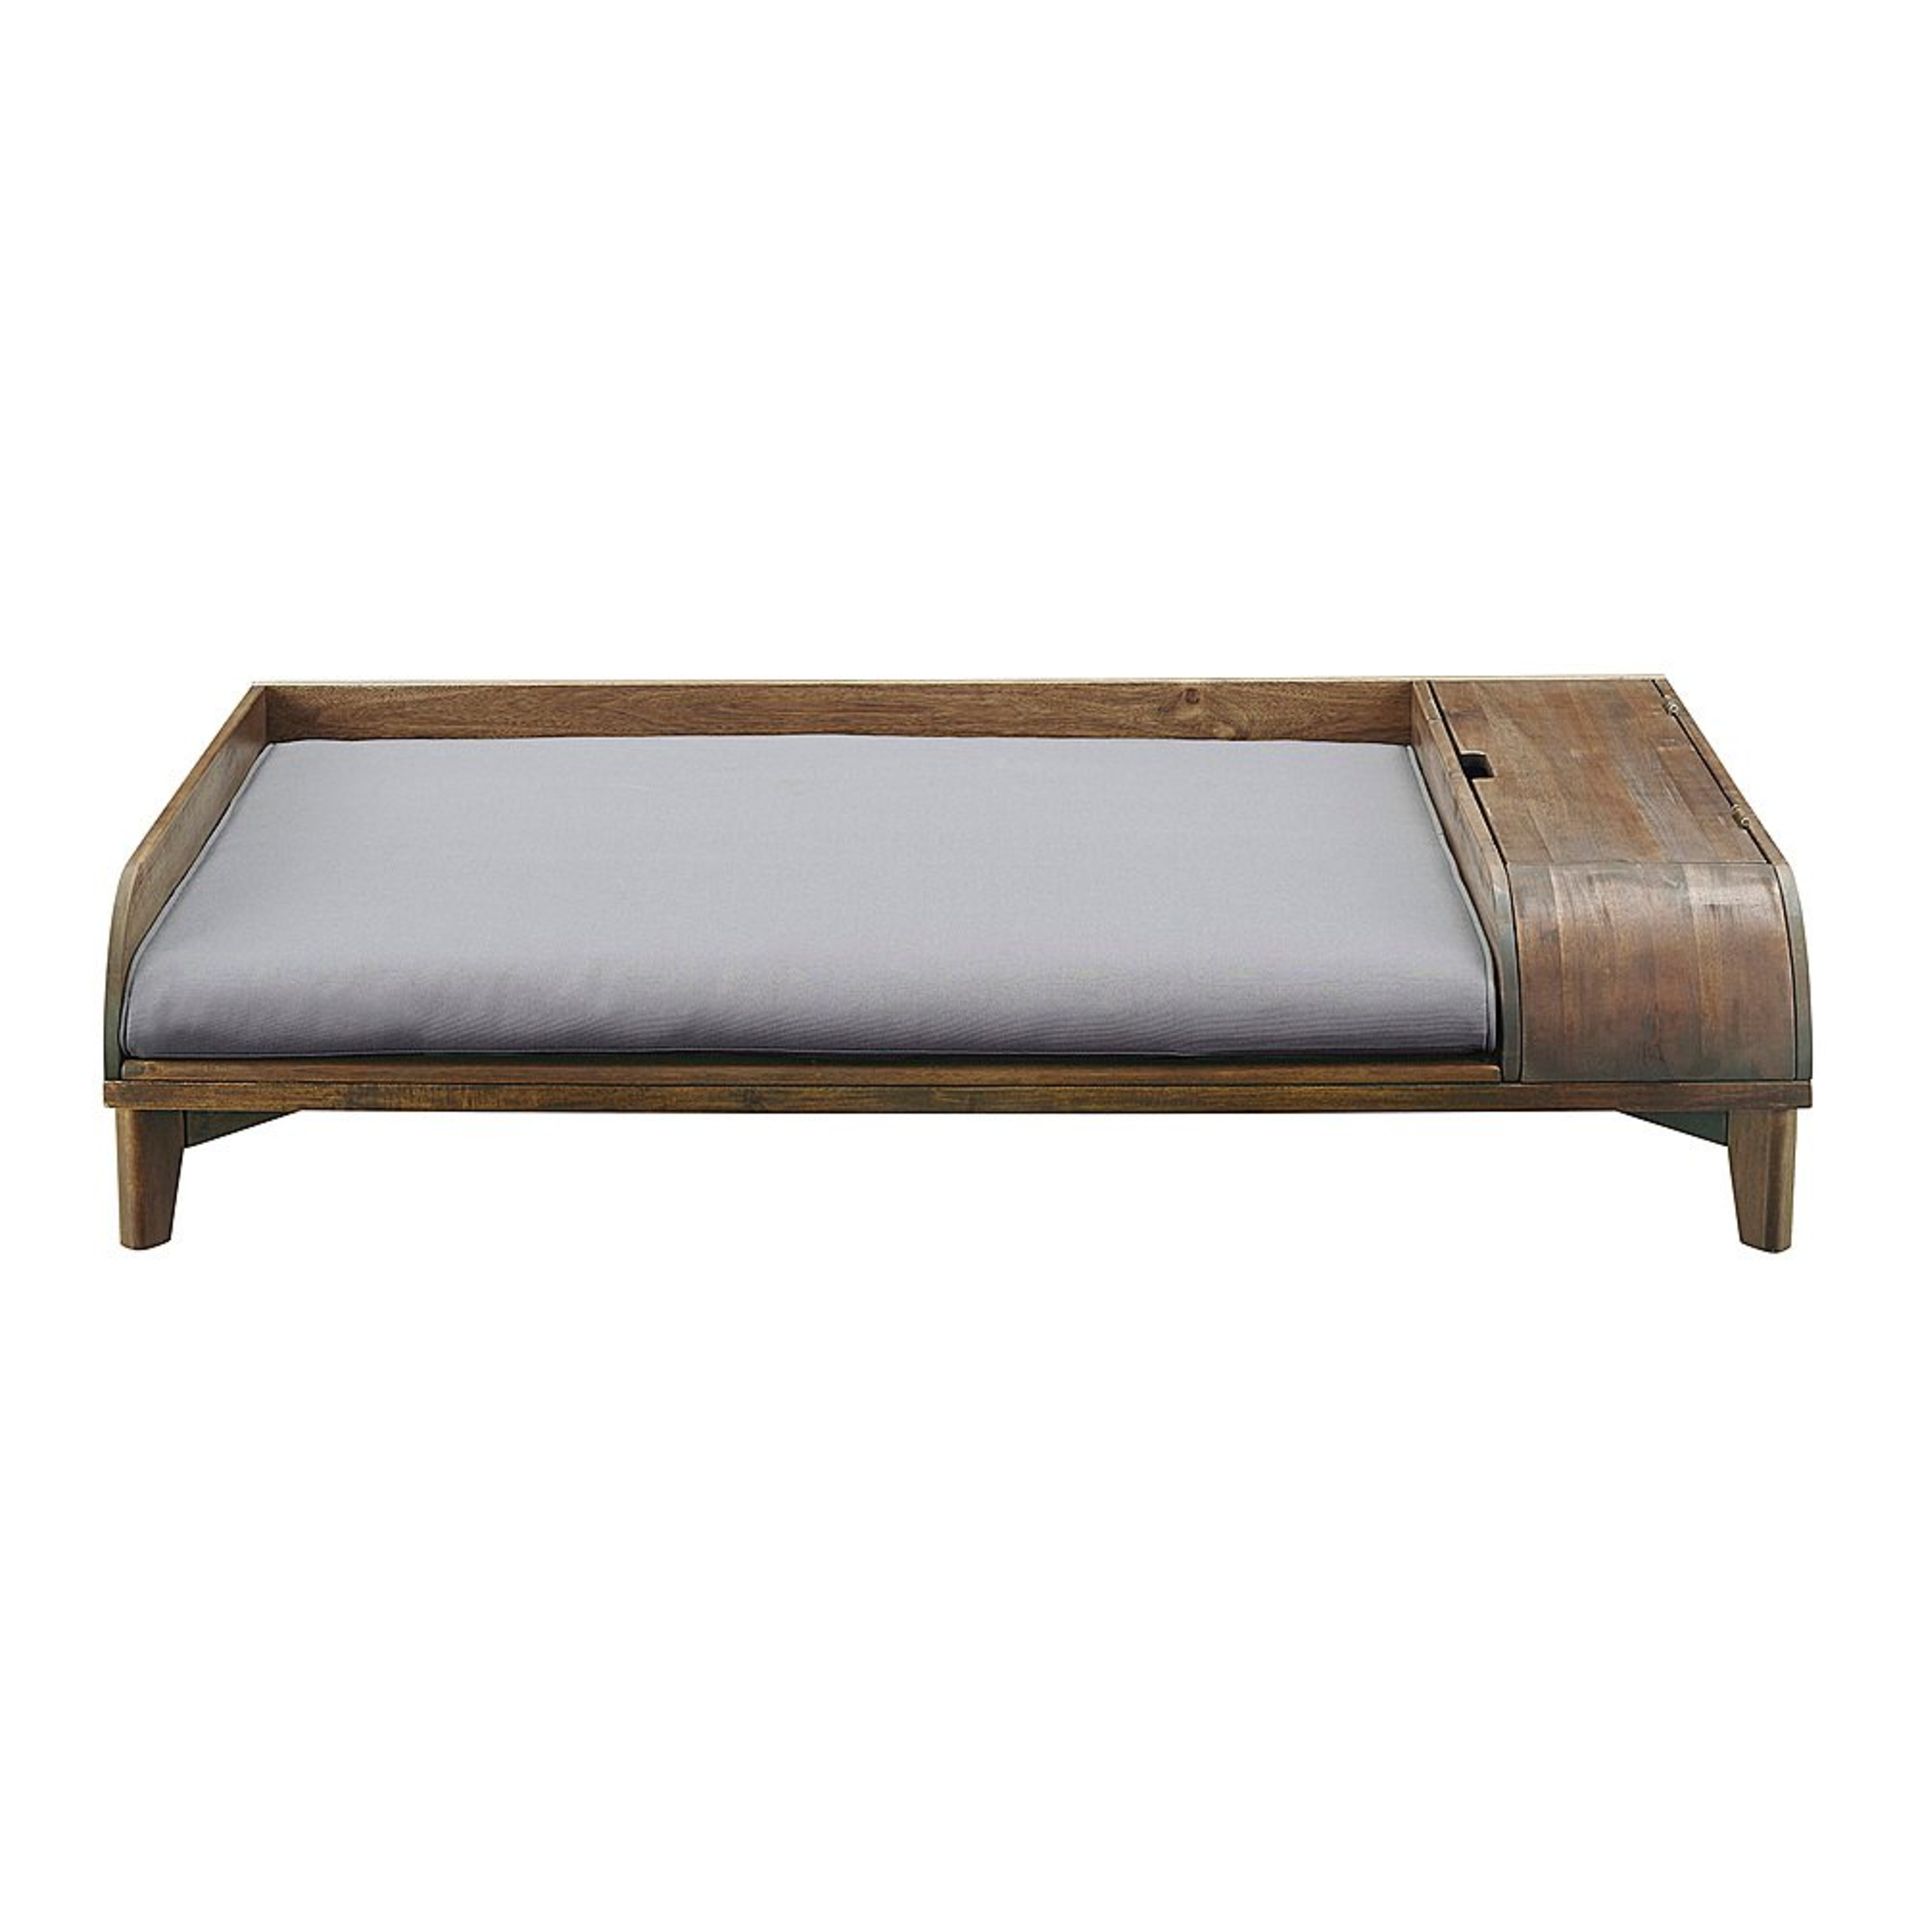 A1 PRODUCT NEW - SOLID WOOD STORAGE PED BED WITH CUSHION IN DARK BROWN/GREY - RRP Ã‚Â£245 - Image 5 of 7